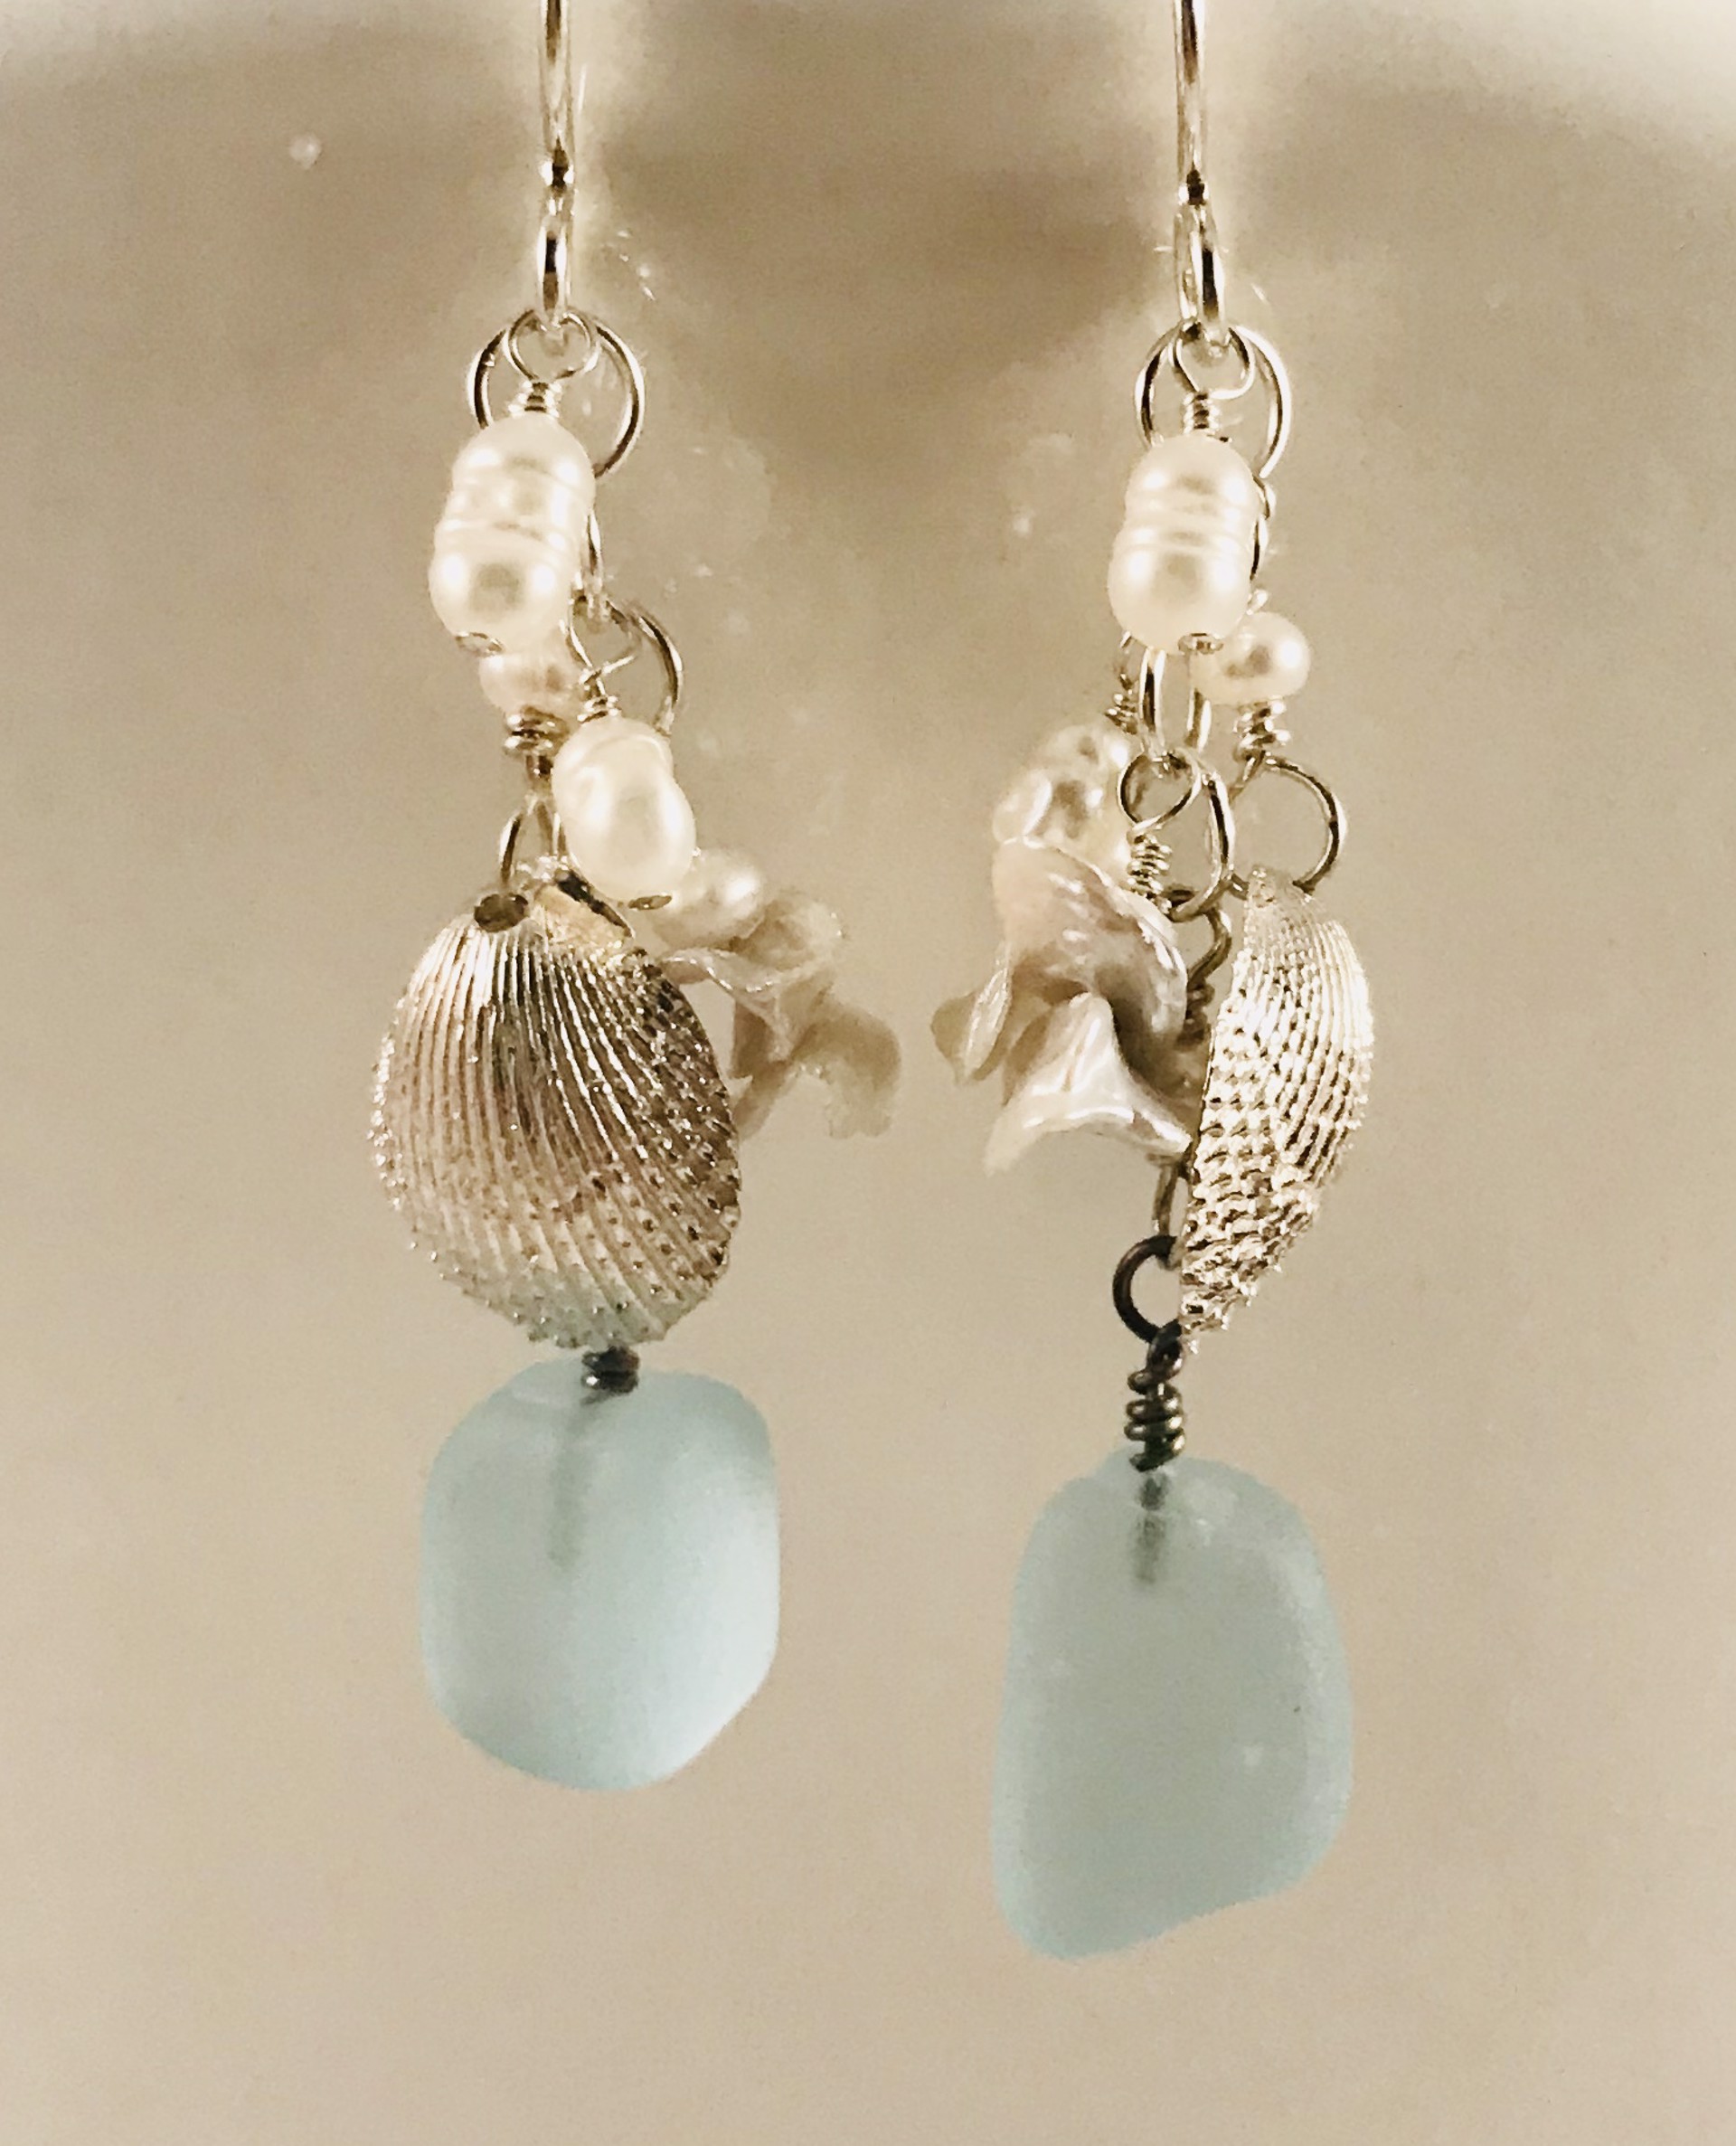 Sea glass, pearls and fine silver shell earrings by Linda Sacra